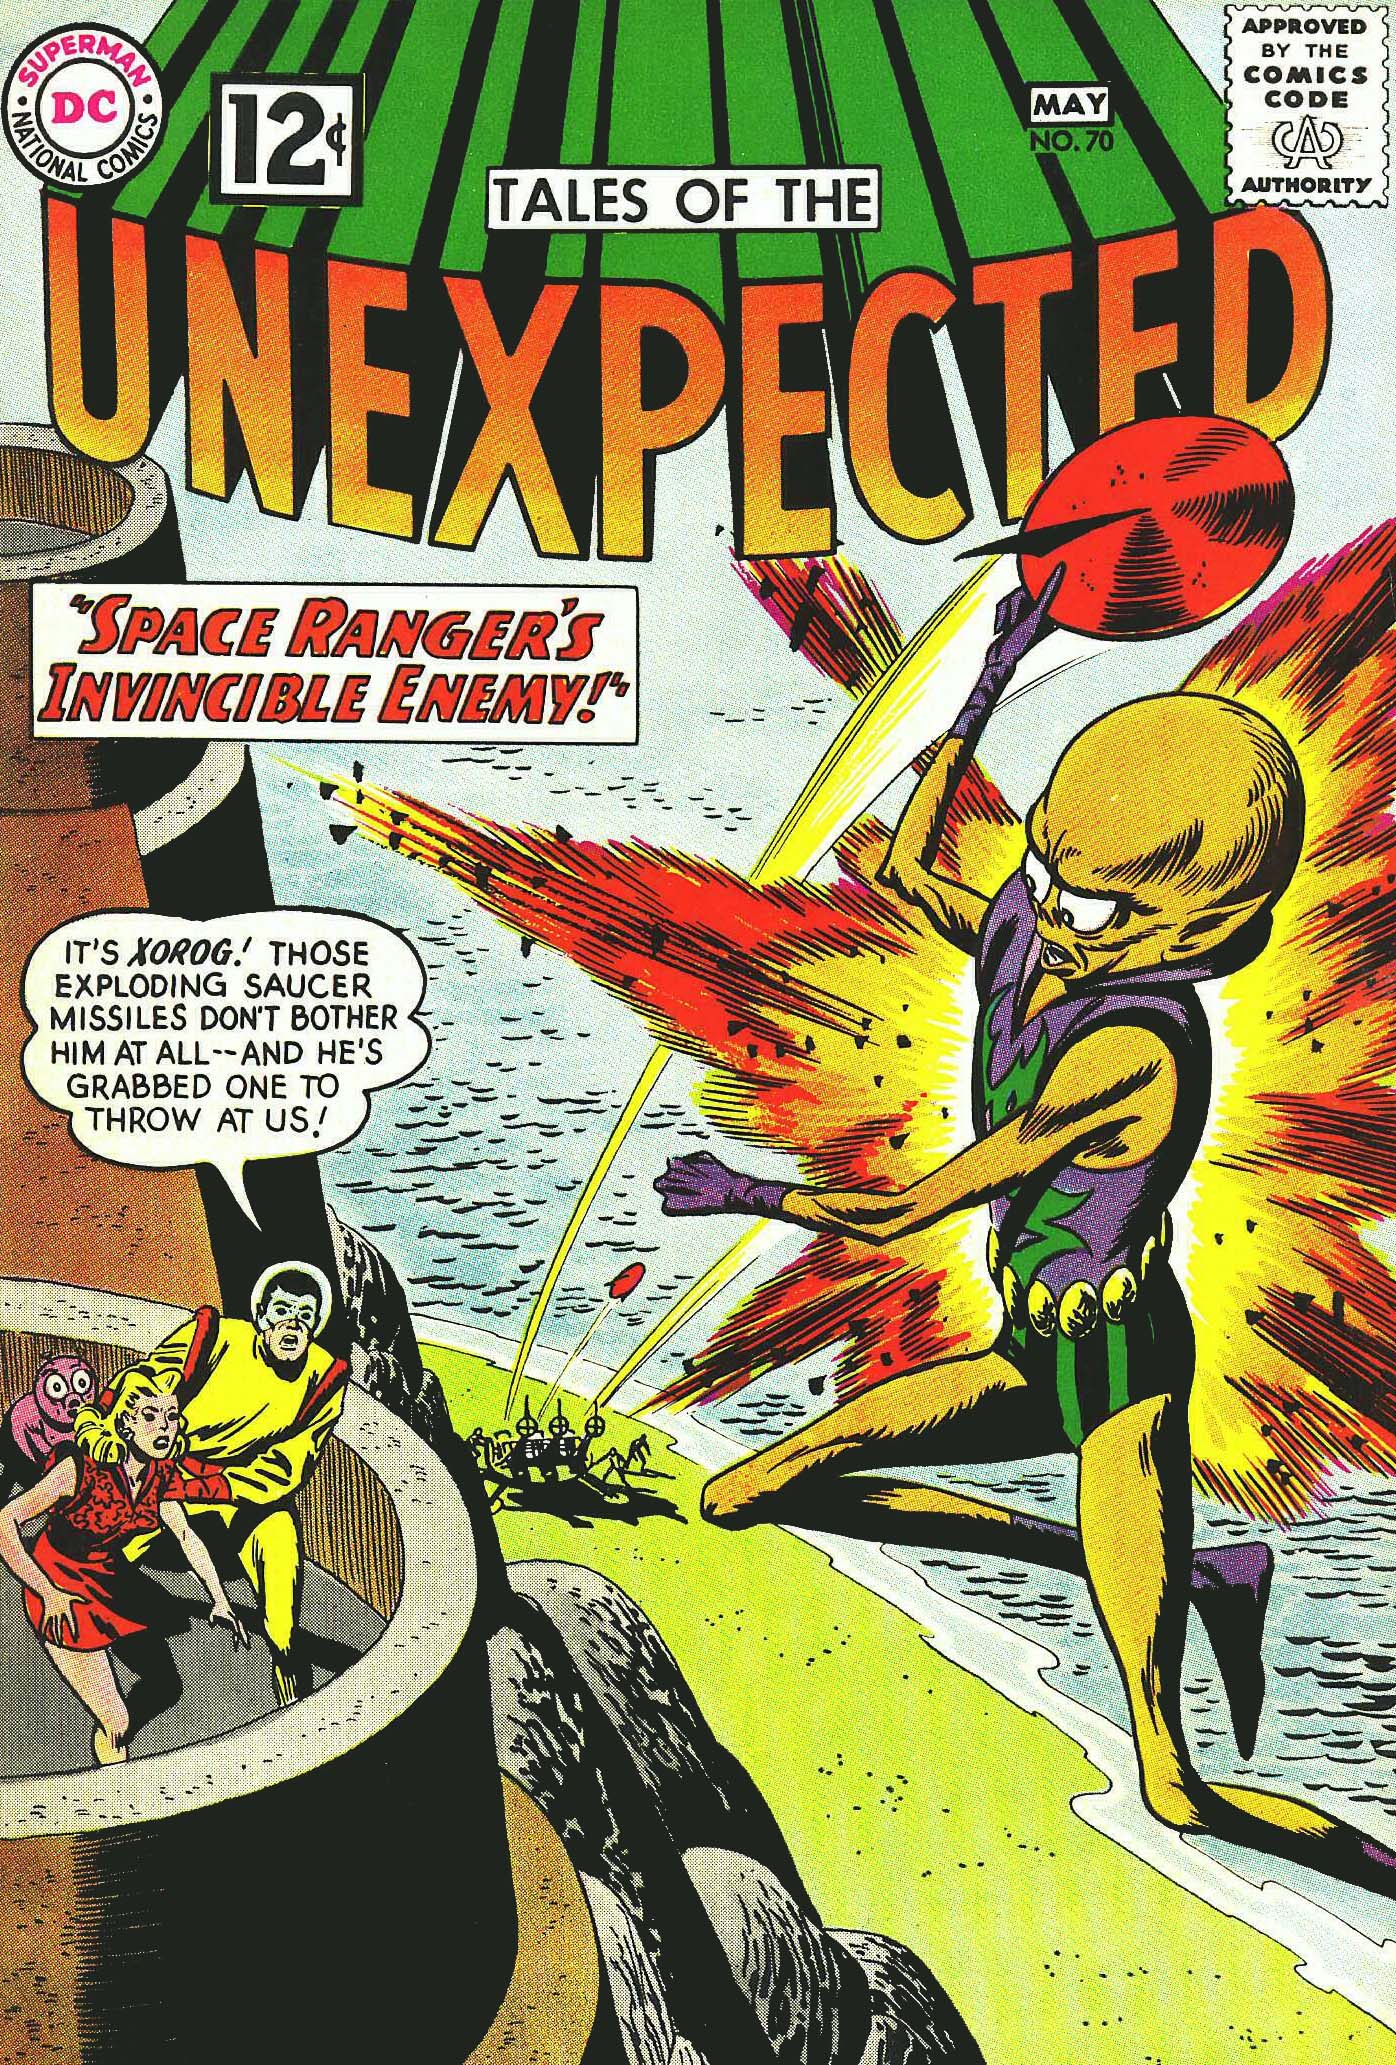 Read online Tales of the Unexpected comic -  Issue #70 - 1